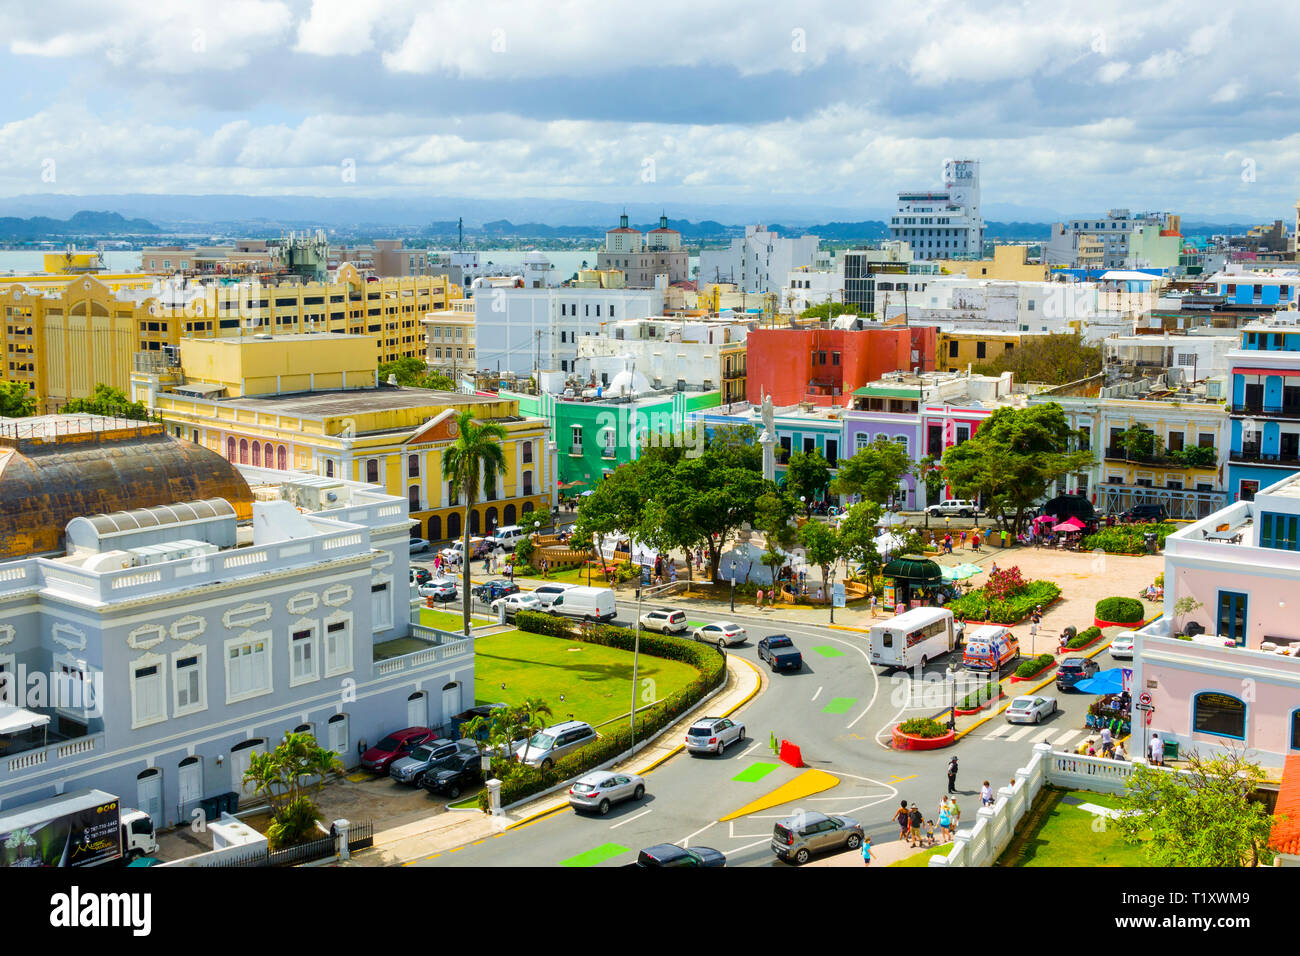 San Juan, Puerto Rico s capital and largest city, sits on the island's Atlantic coast. Its widest beach fronts the Isla Verde resort strip, known for Stock Photo